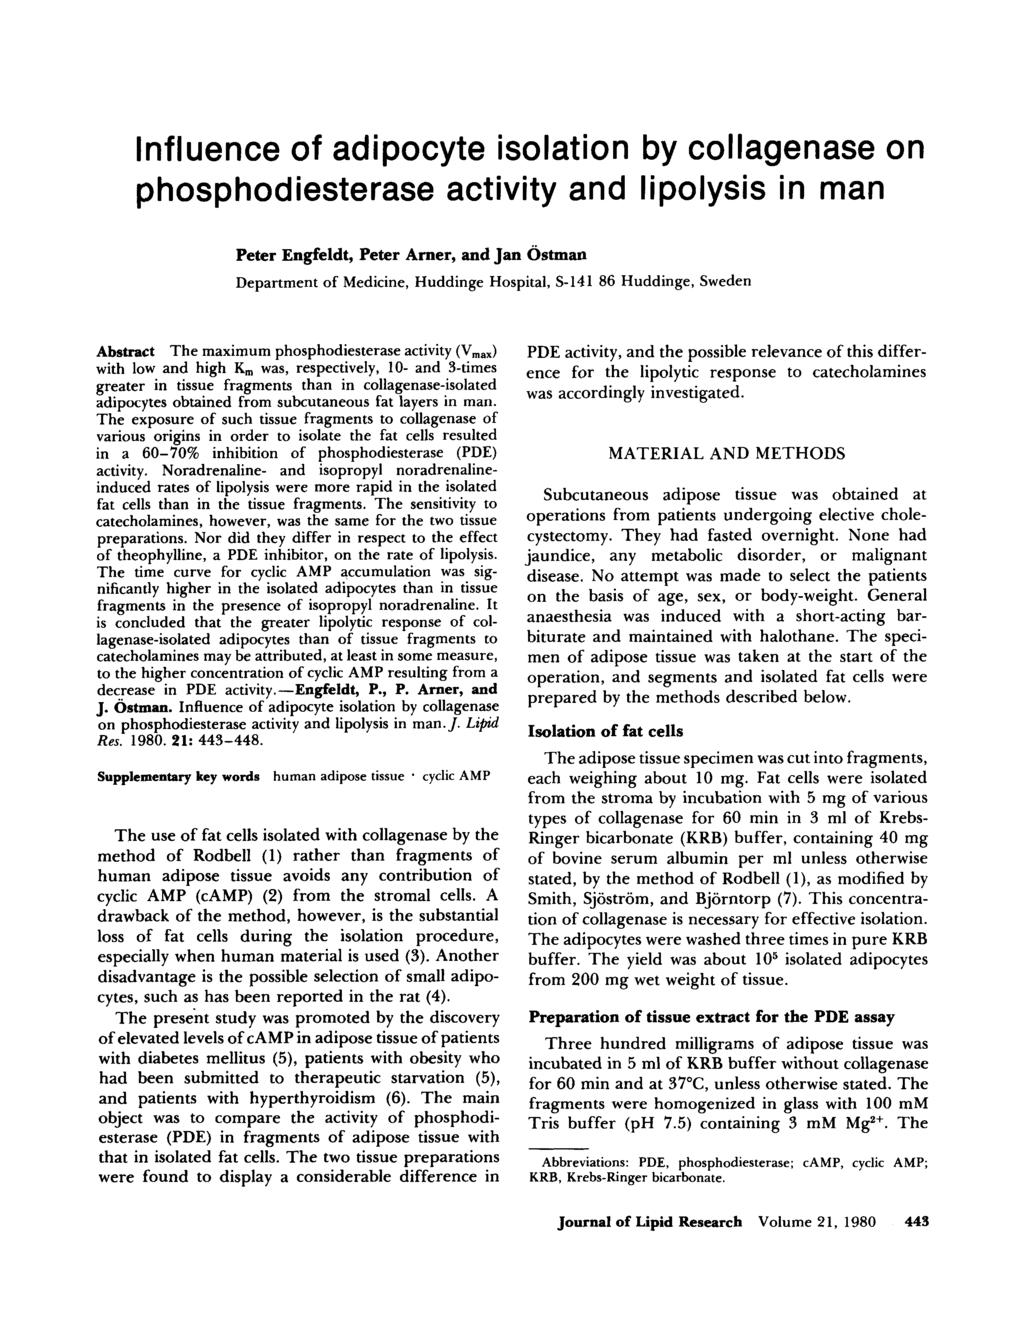 Influence of adipocyte isolation by collagenase on phosphodiesterase activity and lipolysis in man Peter Engfeldt, Peter Amer, and Jan Ostman Department of Medicine, Huddinge Hospital, S-14 1 86